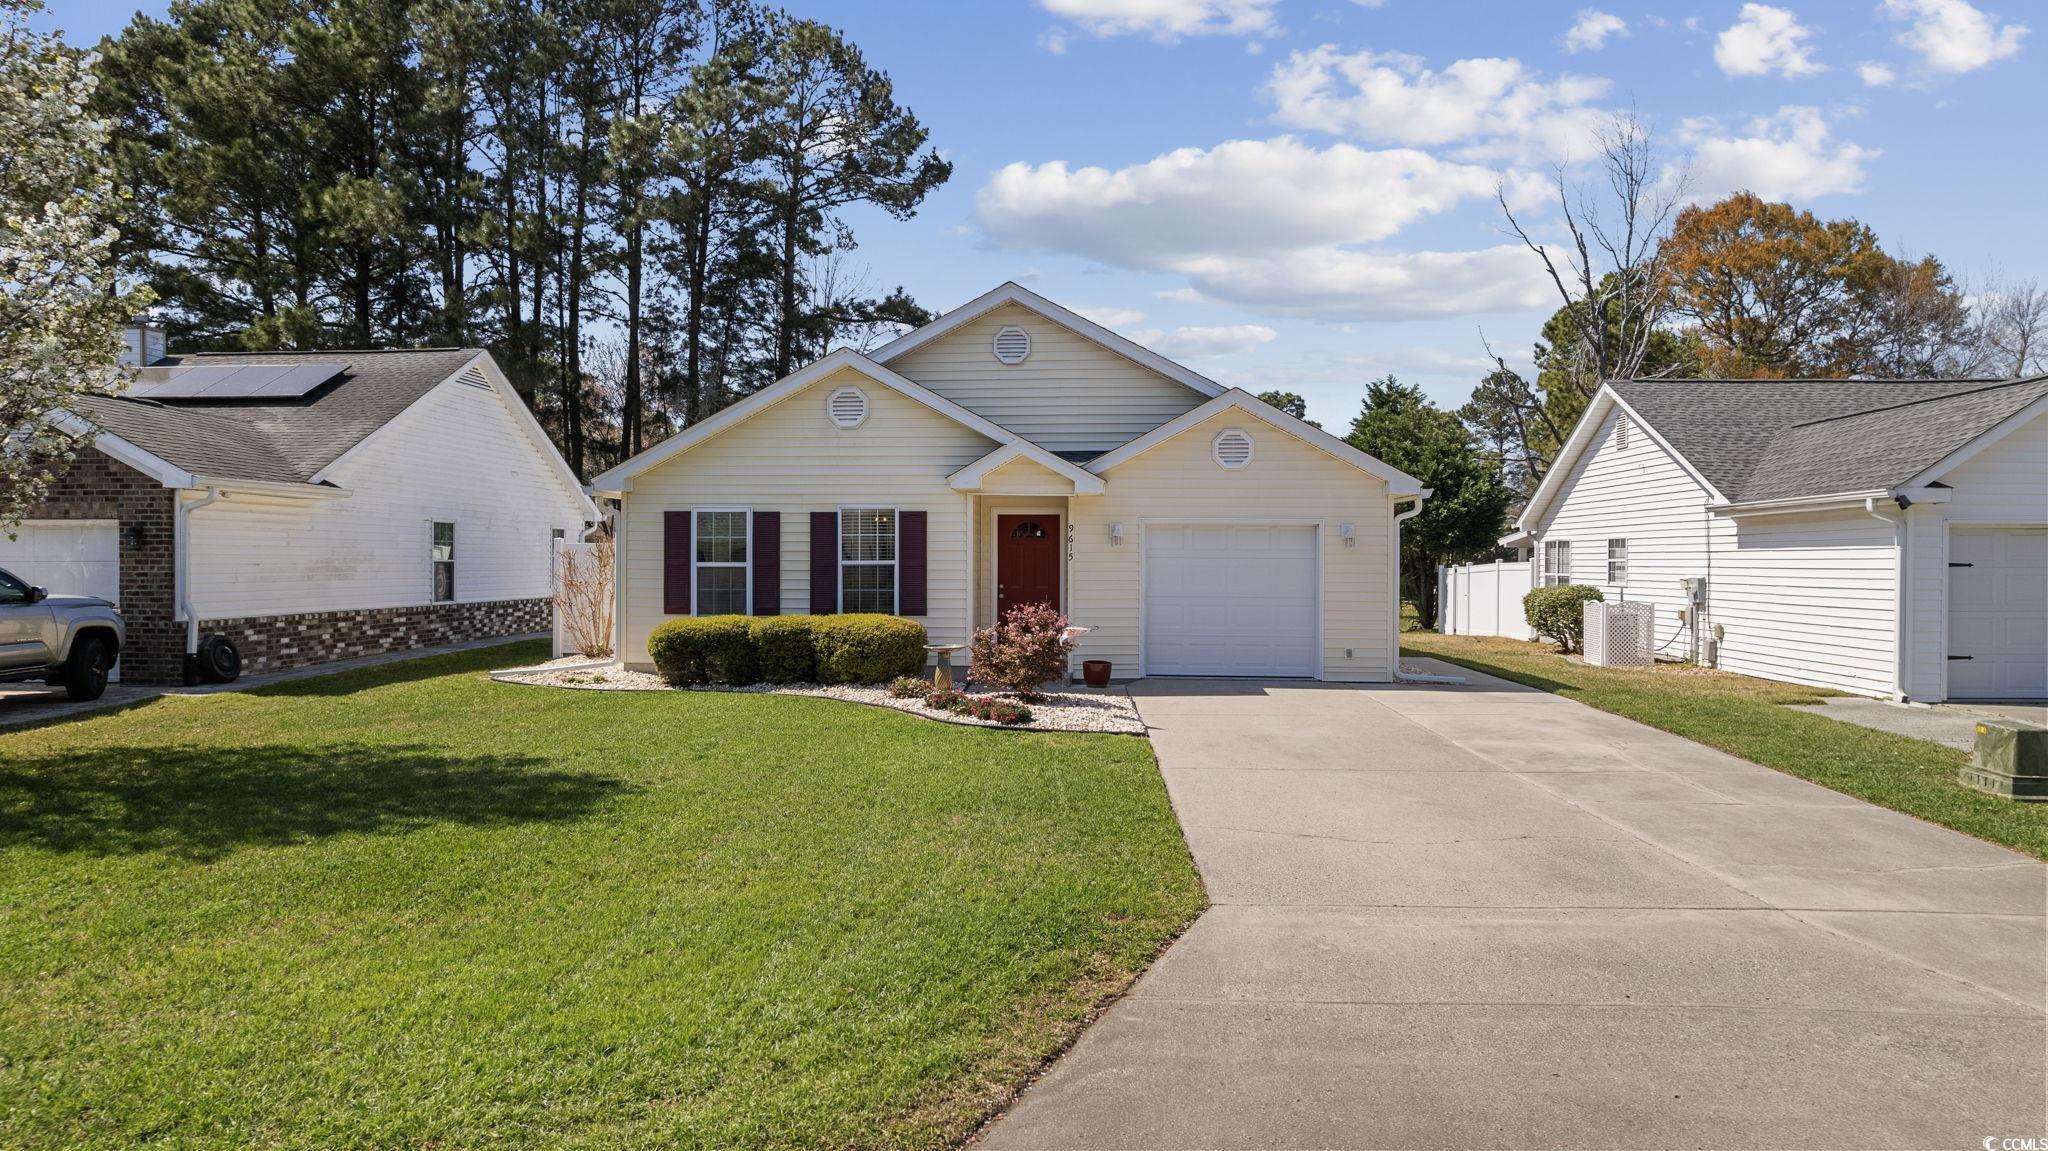 ask your agent about a potential credit at closing! this charming, well-maintained, ranch style home is located just a short drive to murrells inlet marshwalk and surfside and garden city beaches. you will note the beautifully kept front yard as you approach this home, the one car garage and ample driveway parking. kings grant is a small community that also has a pool (nominal fee/year for access) and a playground. whether you are buying your first home, looking for a vacation home, or are just relocating this lovely home would meet your needs. as you enter, the kitchen and eat-in dining are on the left. the range and microwave are newer (2023), you have a work island, plenty of cabinet space and who doesn't love a kitchen with windows.  in the living room, the fireplace (wood burning converted to propane) makes a beautiful focal point and the vaulted ceiling opens up this cozy space.  down the hall you will find two guest bedrooms, guest bath, and the spacious primary bedroom and primary bath.  off the living area there is a side patio with some privacy and a generously sized backyard (fences allowed).  roof 2016.  hvac 2020.  water heater 2024. ceiling fans in all bedrooms.  single level home with low hoa fee.  washer and dryer convey.  the owner also recently painted the home and installed a new front door in preparation for the sale. book a private showing as soon as possible.  be sure to check out the video tour.  welcome home!